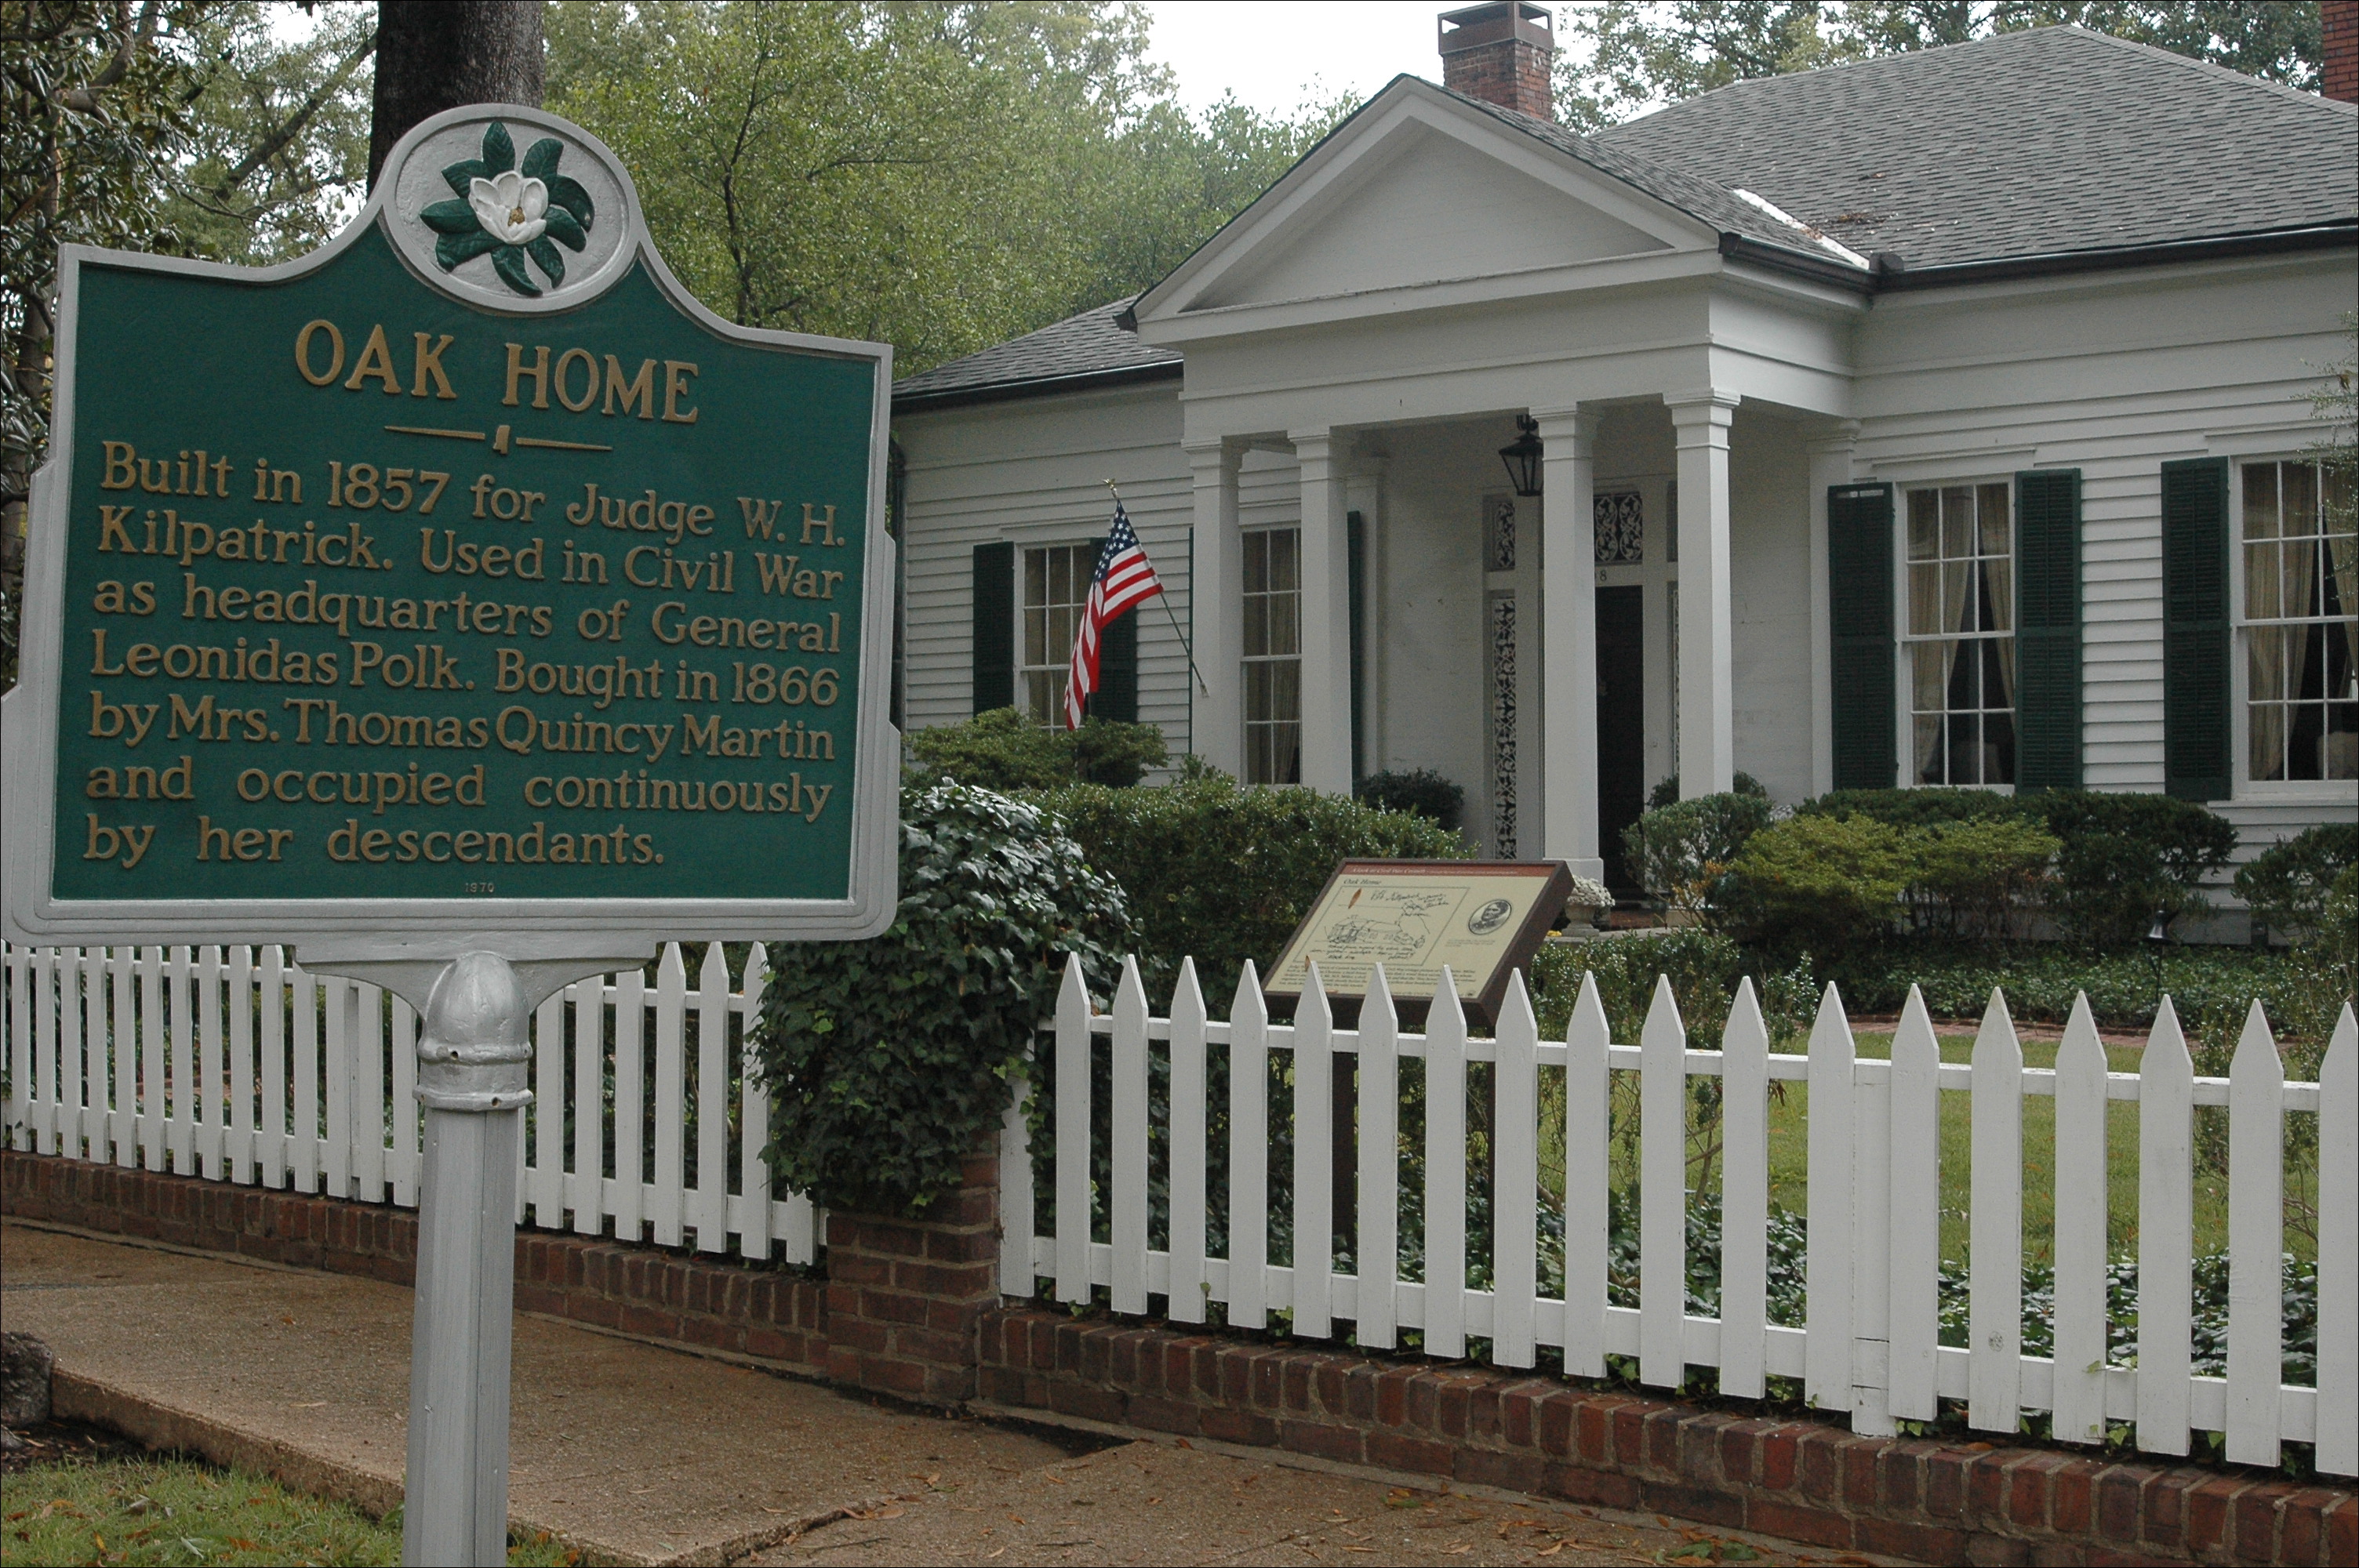 Oak Home built in 1857, a National Historic Landmark and former headquarters for Civil War General Leonidas Polk. Private and located in historic residential district. Photo courtesy: The Daily Corinthian